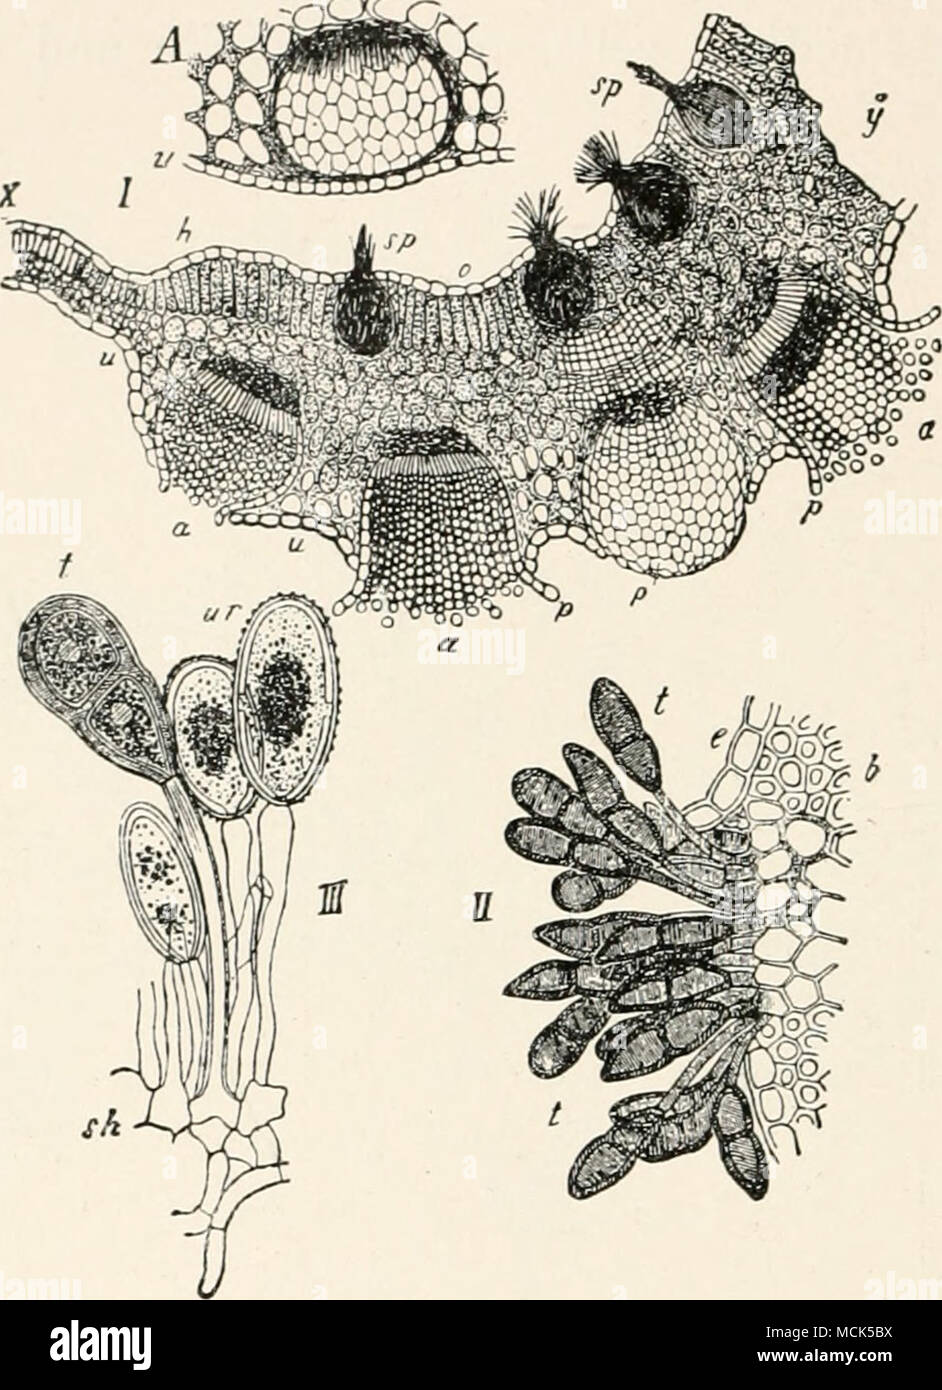 . Fig. 184.—Puceinia graminis. A, Portion of transverse section of leaf of Berberis vulgaris, with a young aecidium under the epidermis, v. I. Section through an aecidiuni-bearing spot of a Barberry leaf. At x the normal structure and thickness of the leaf is shown, the portion u to »/ is abnormally thickened ; h to o, upper surface of the leaf ; sp, pycnidia ; a, aecidia in section ; p, their peridium. The aecidiumi marked p alone (without a) shows a peridium exposed in suiface-view only. II. Mature teleutospore-patch breaking through the epidermis, e, from the tissue, Ij. of a leaf of Tritic Stock Photo